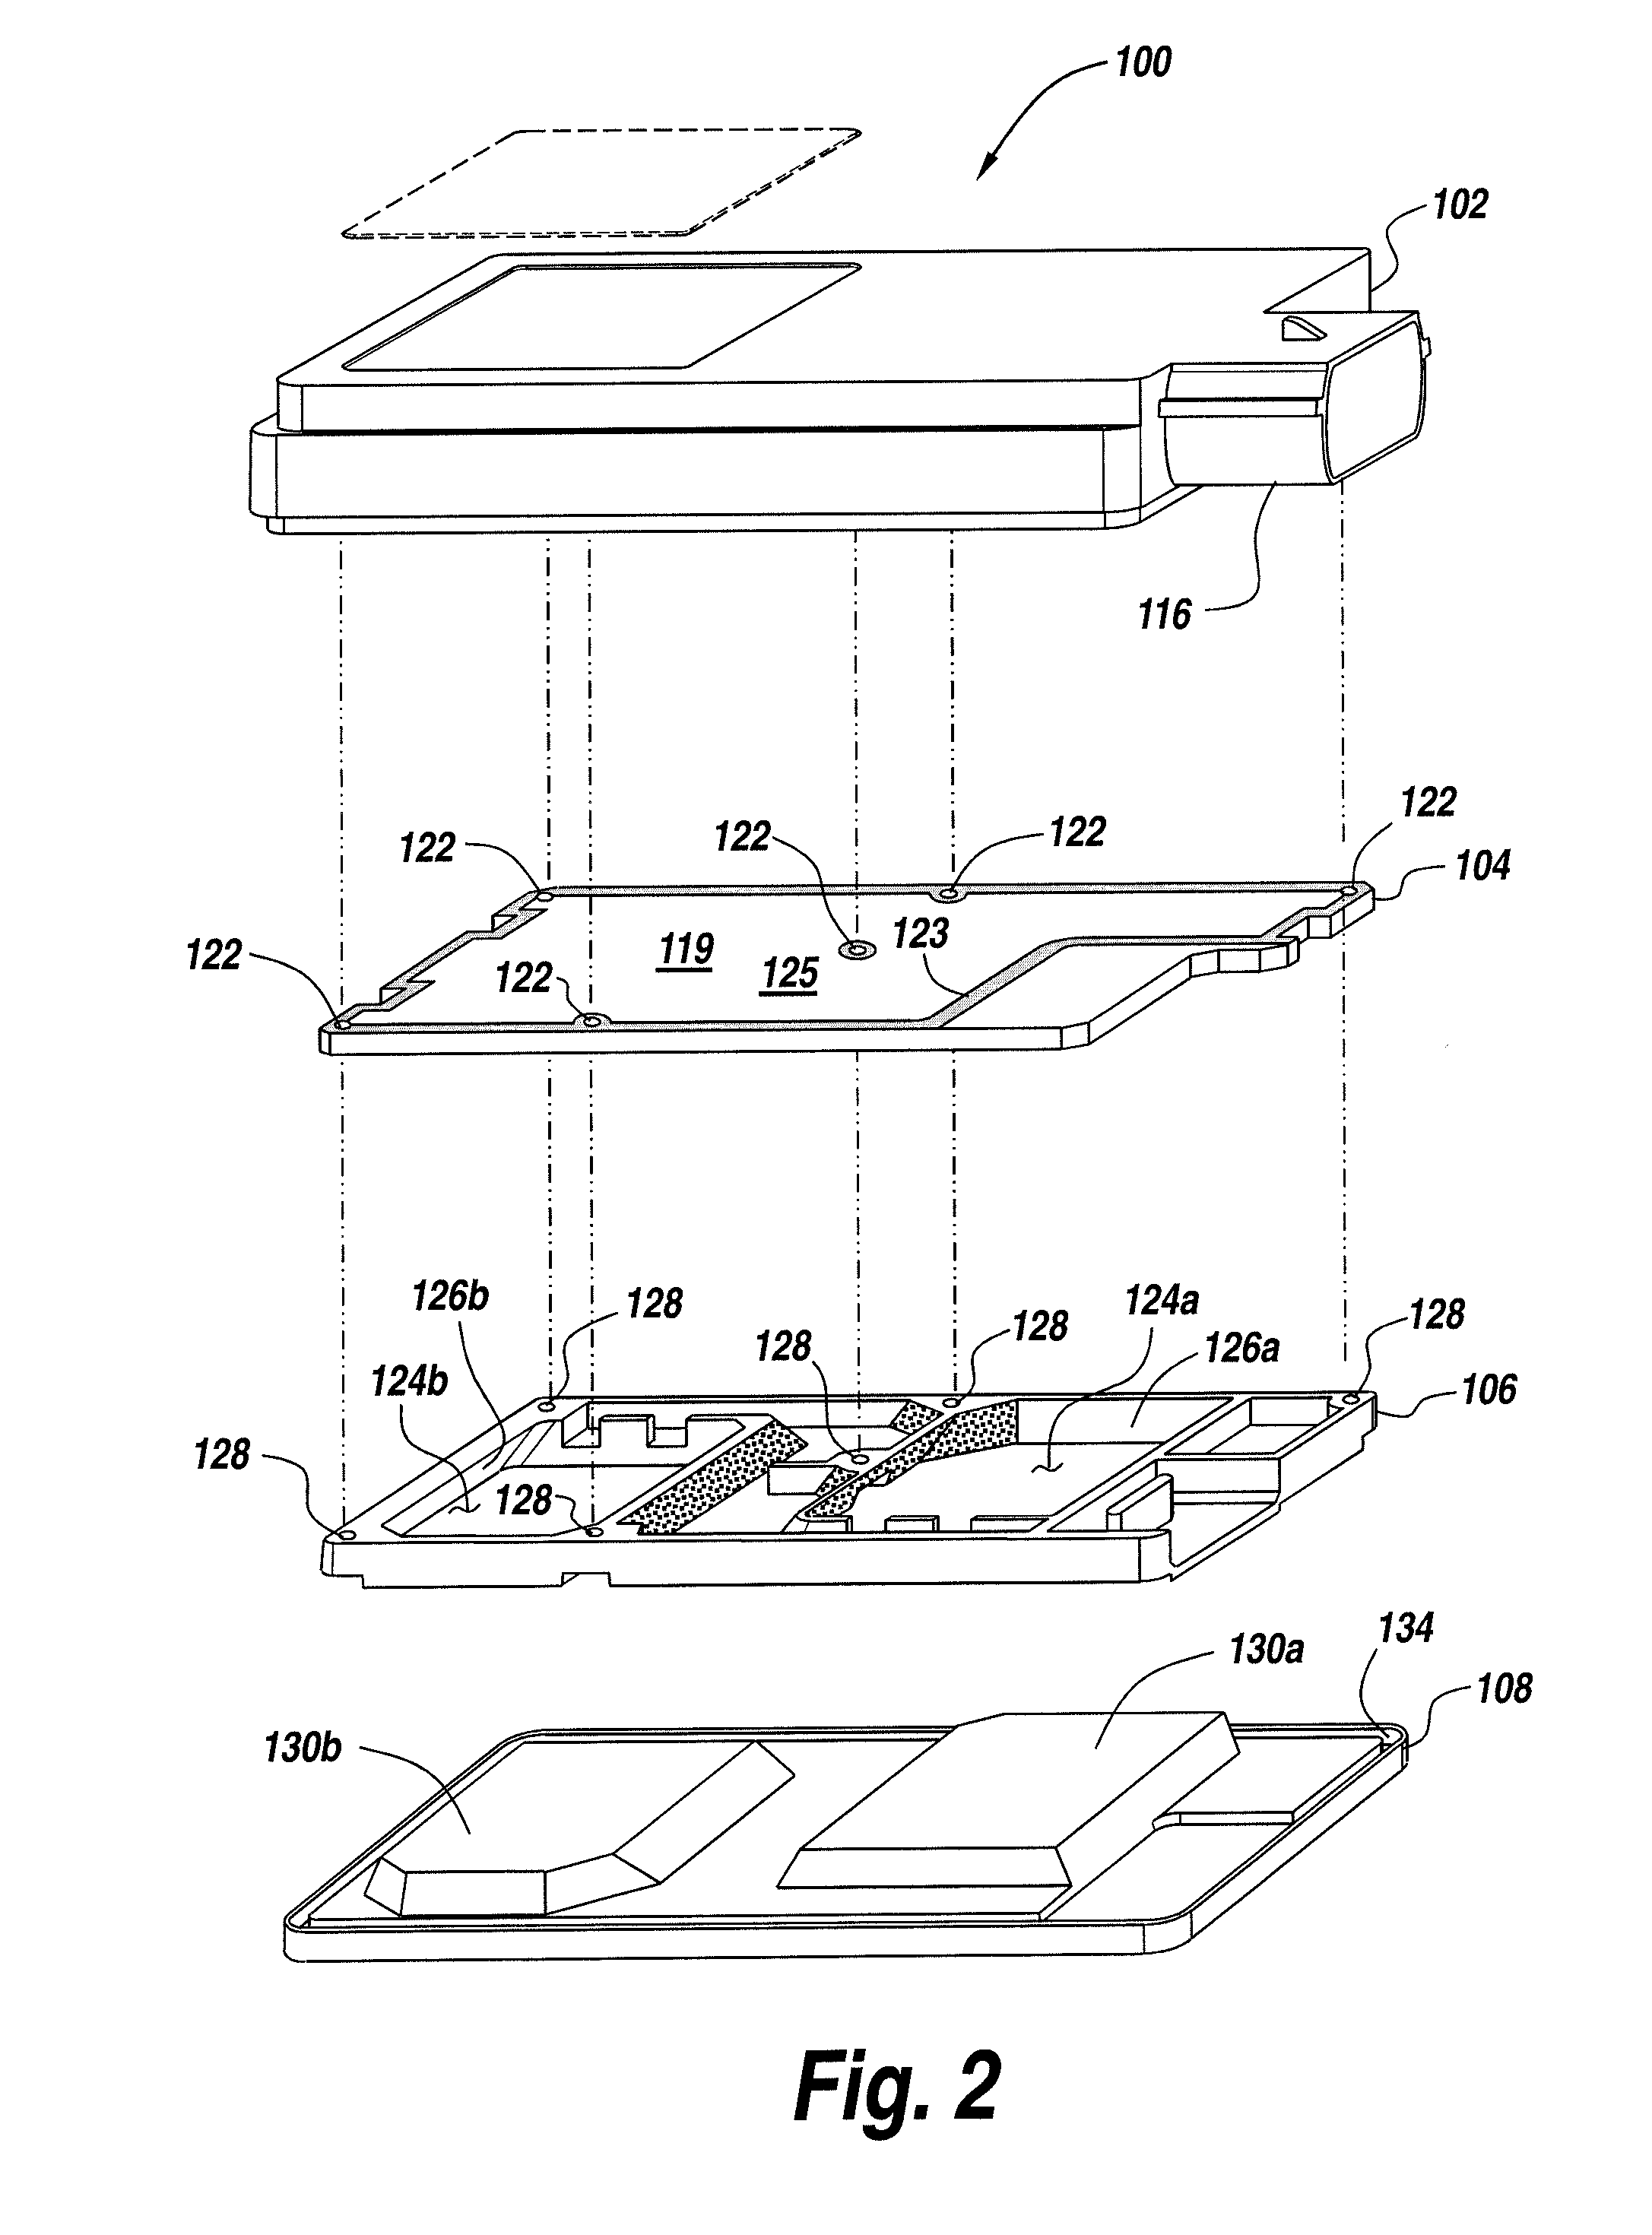 Apparatus and method for mitigating multipath effects and improving absorption of an automotive radar module